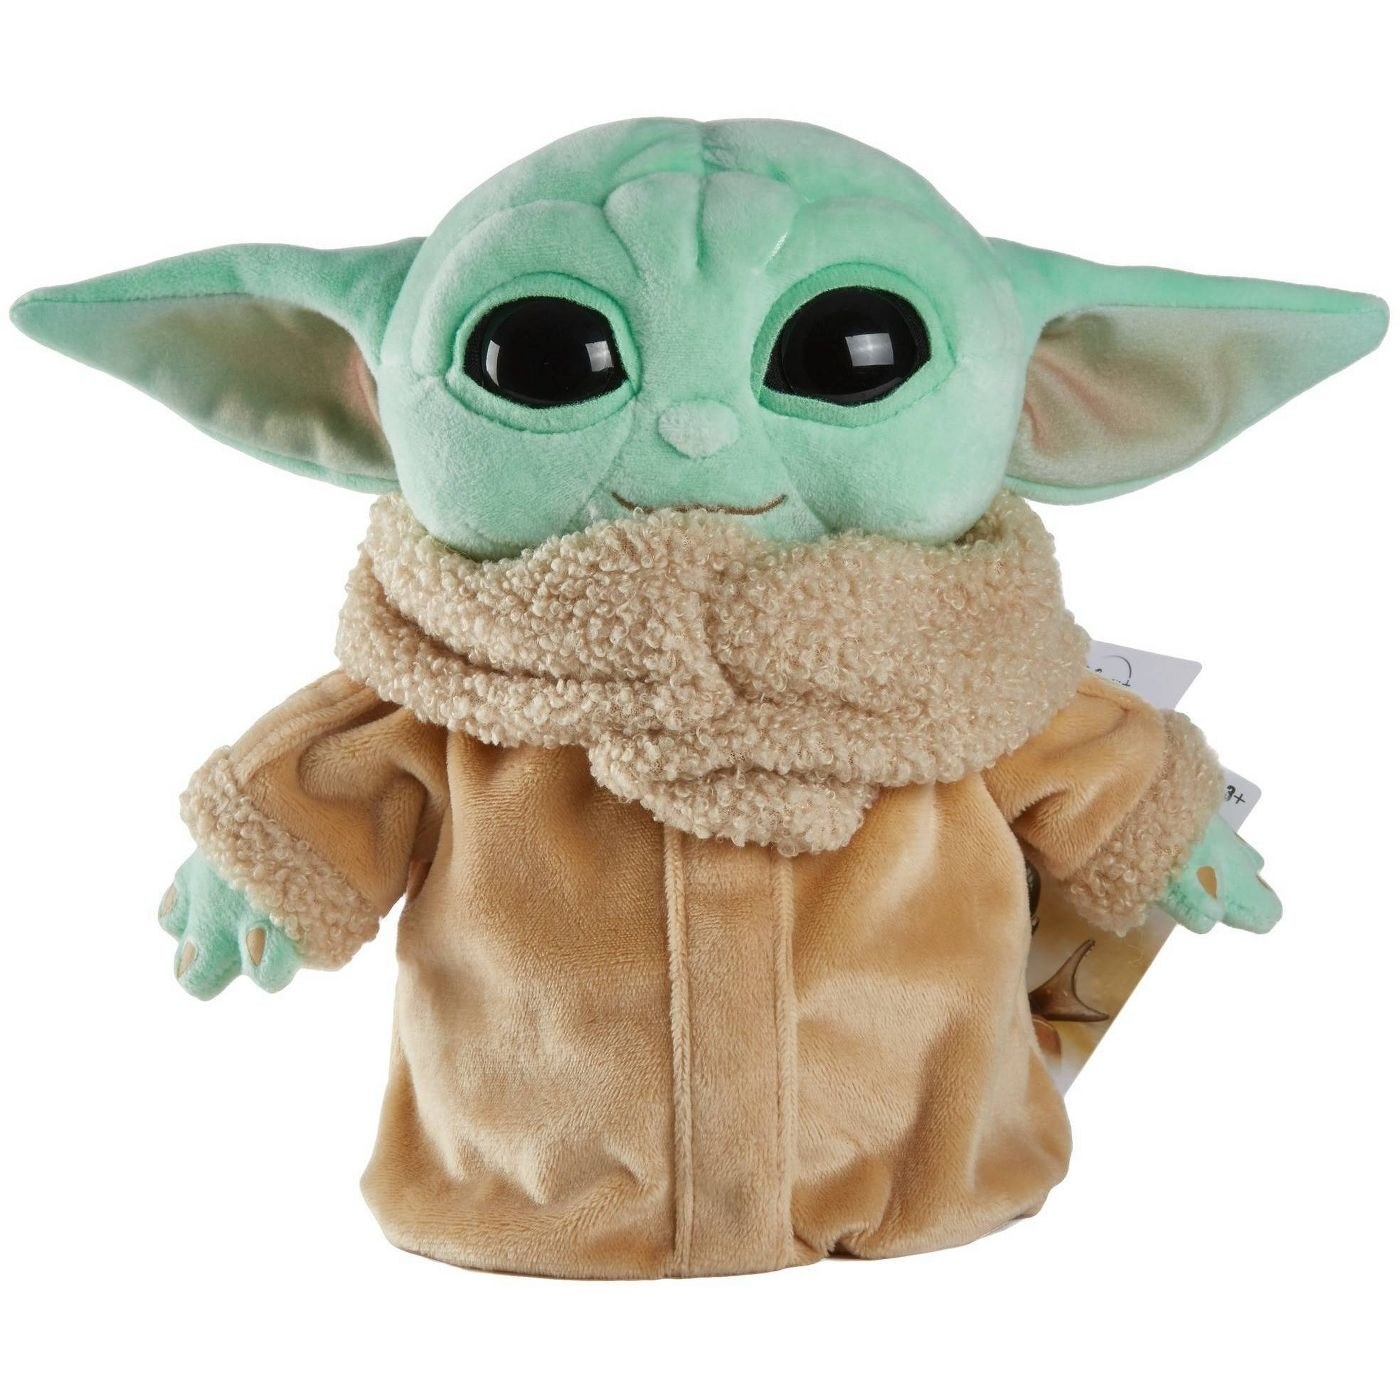 The doll, which is made of soft plush all over, and is wearing the robe that Baby Yoda wears on the Mandalorian